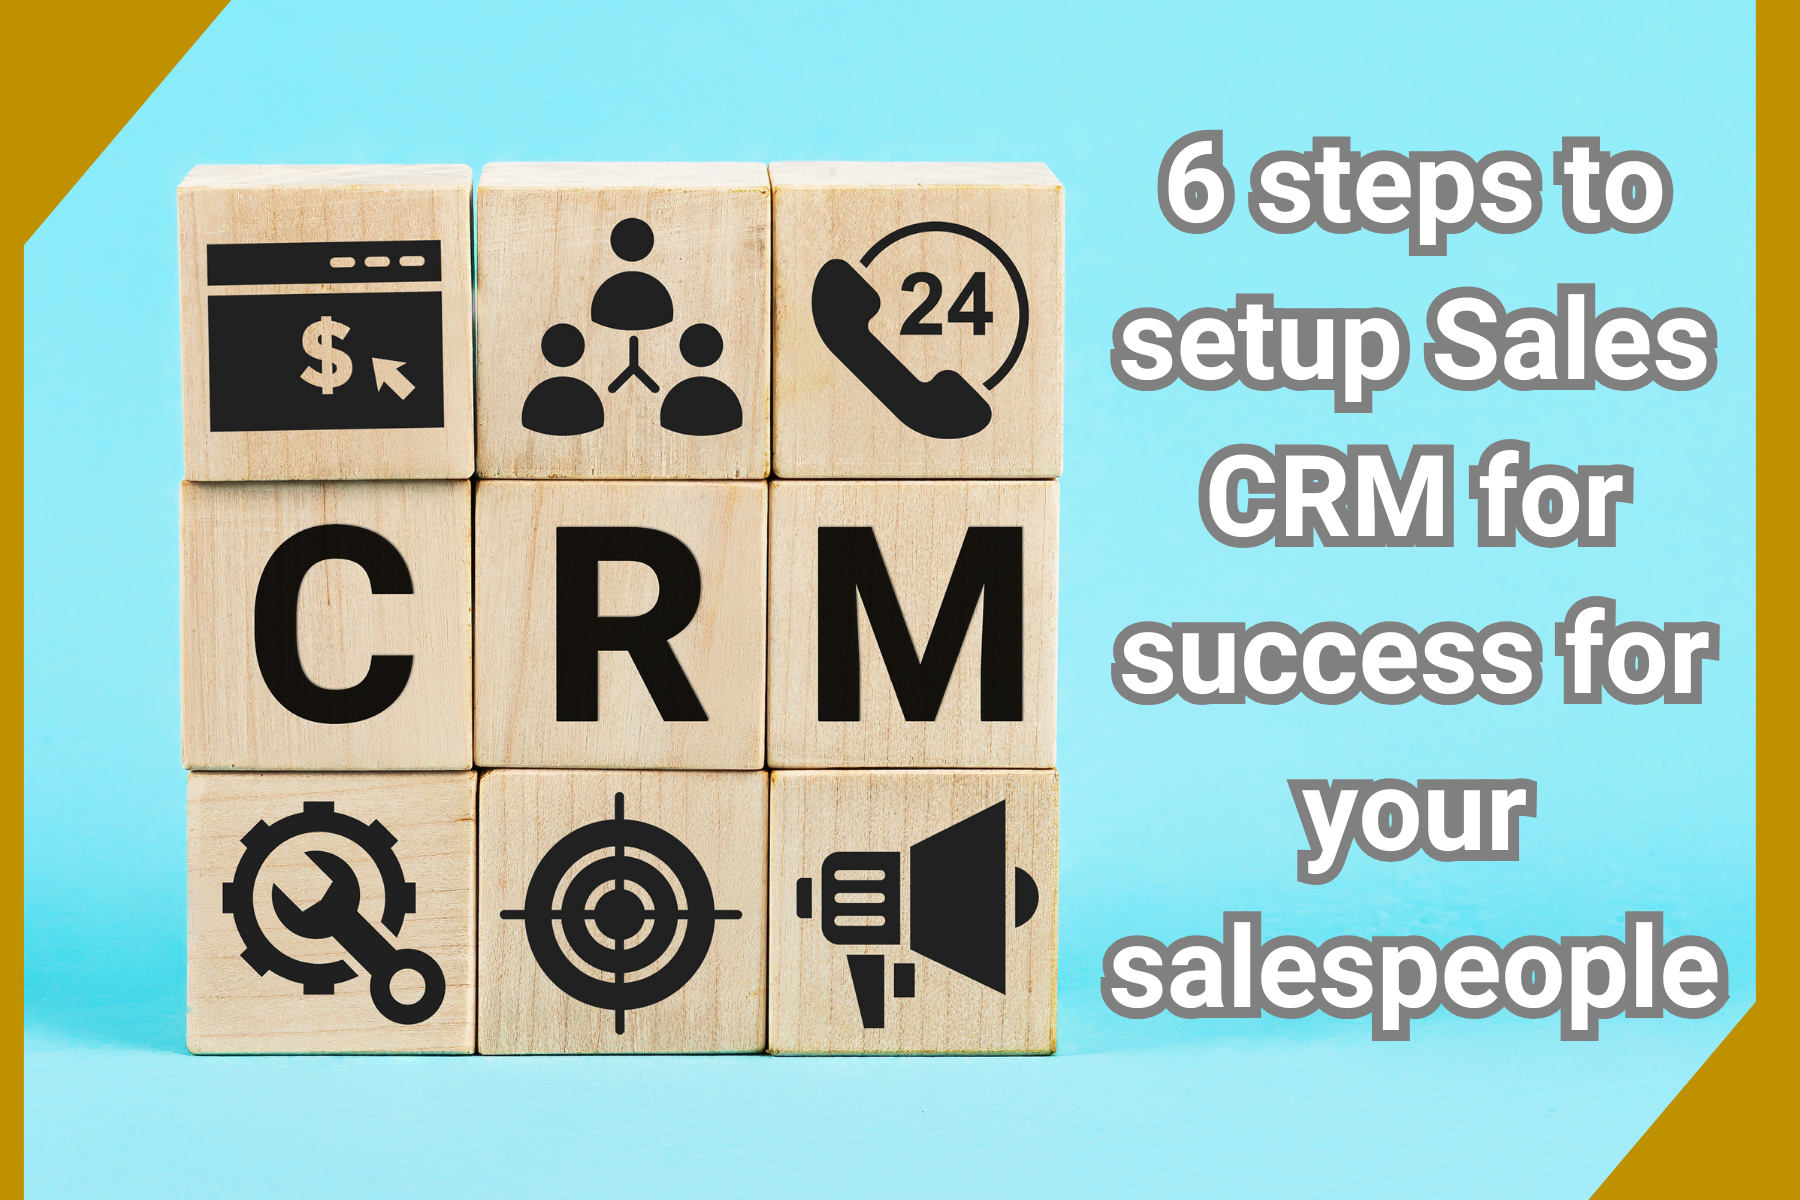 6 steps to setup Sales CRM for success for your salespeople